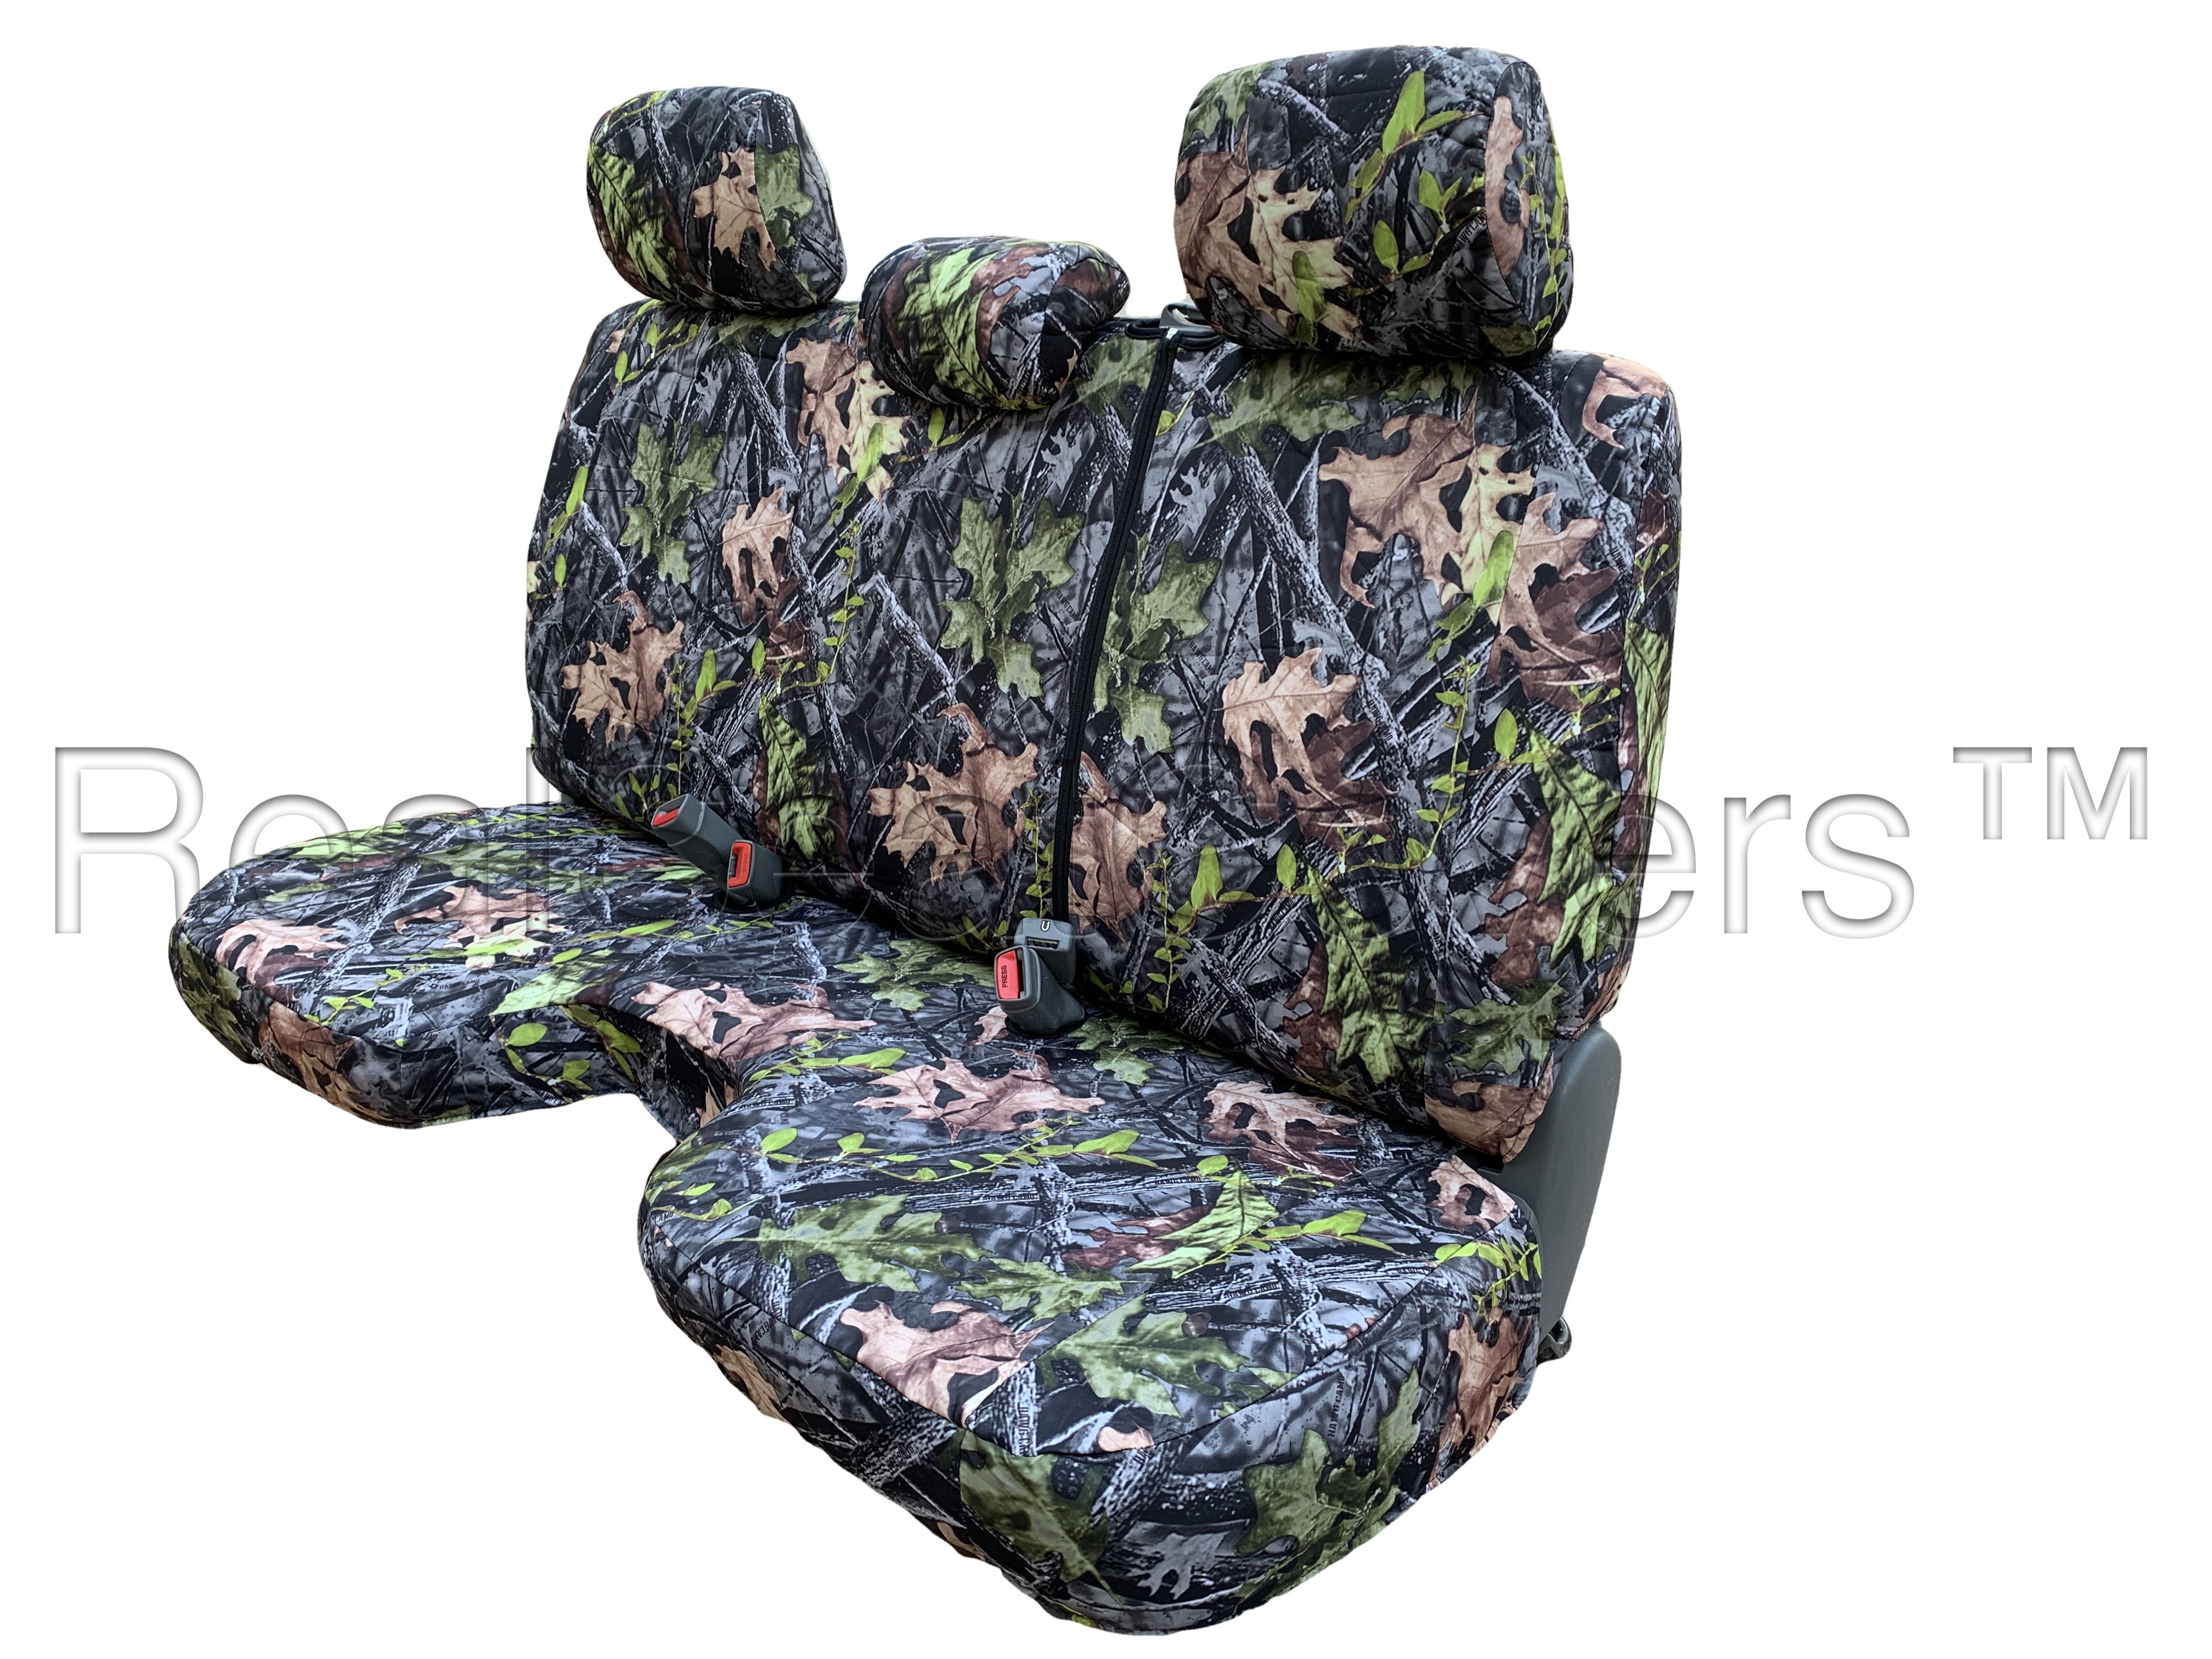 Seat Cover Made to Fit for Toyota Tacoma Reg Cab Bench 3 Adjustable Headrest Custom made Exact Fit A30 (Forest Camo) - image 1 of 3